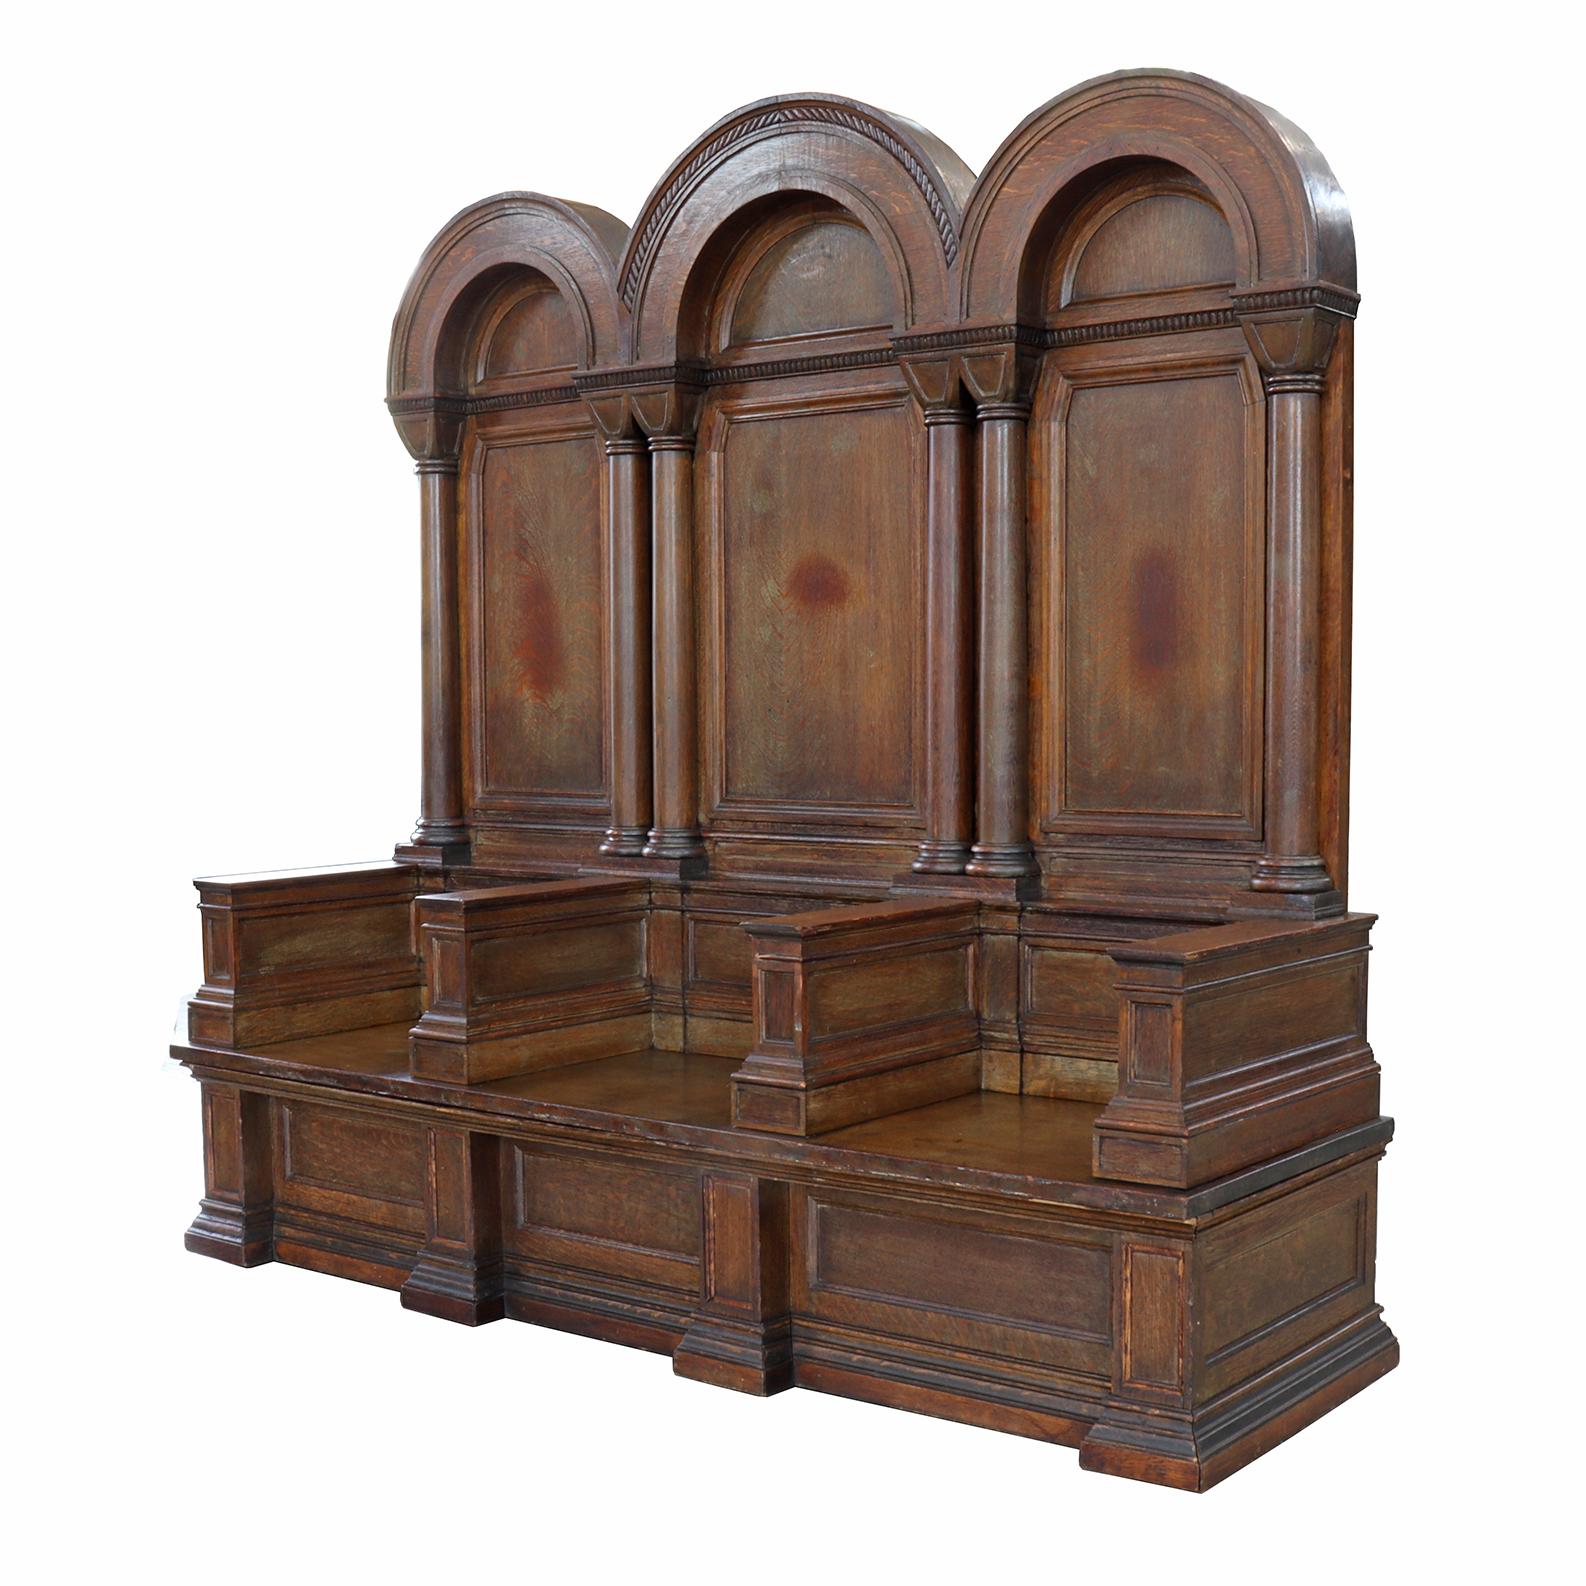 Salvaged out from an east coast fraternal lodge, this piece exudes a certain gravitas in its resolute and imposing form. Columnar accents and some restrained accent molding are the only decorative details apart from the distinctive paneling.